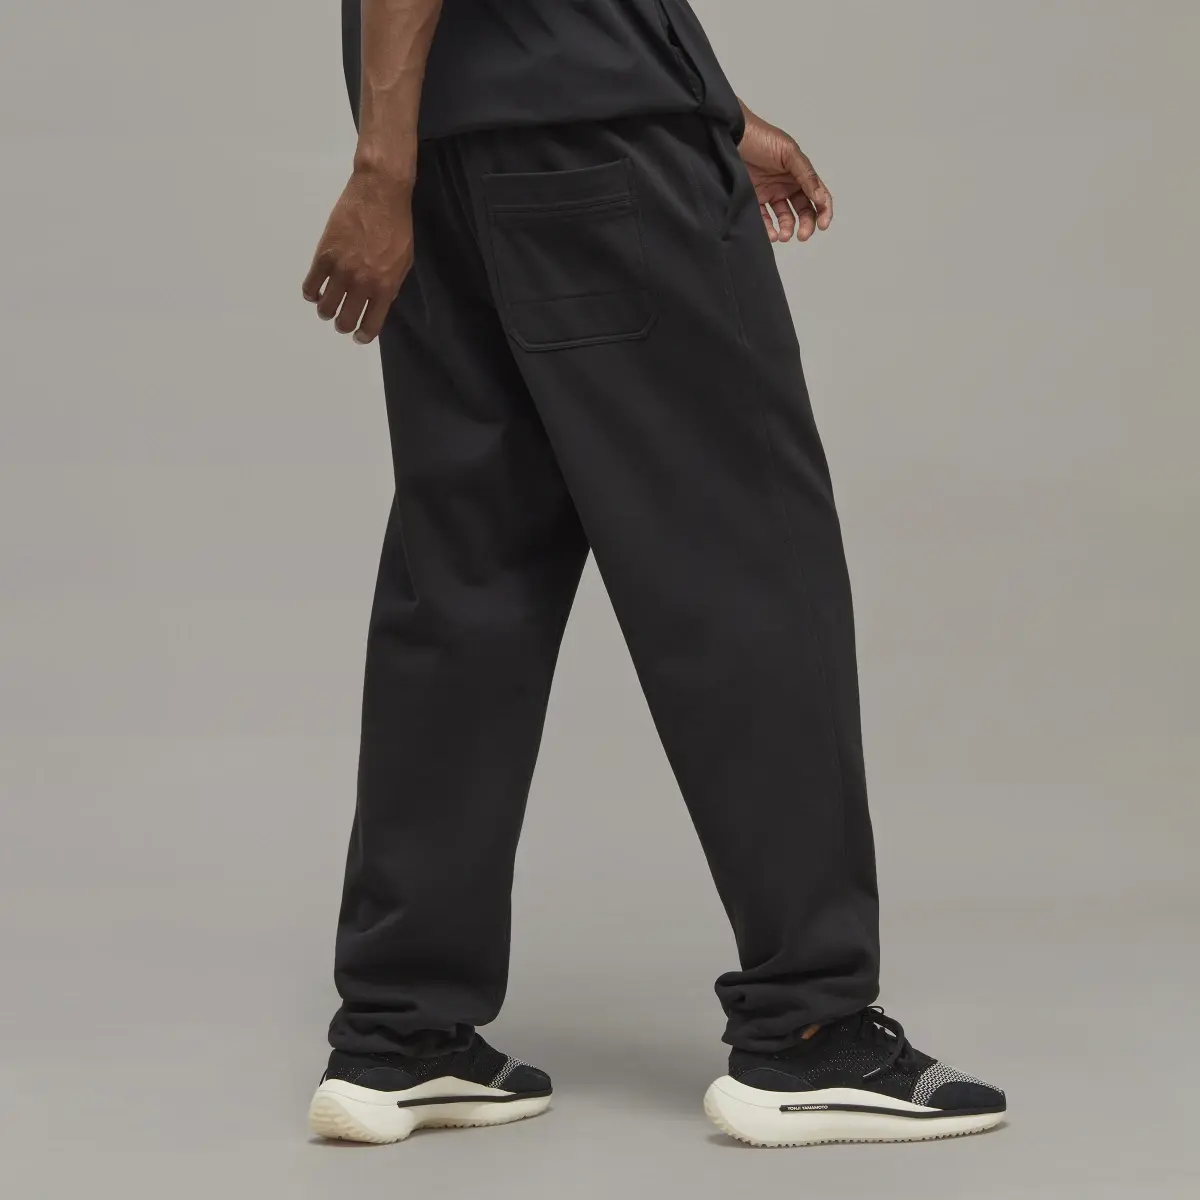 Adidas Y-3 Organic Cotton Terry Straight Joggers. 3